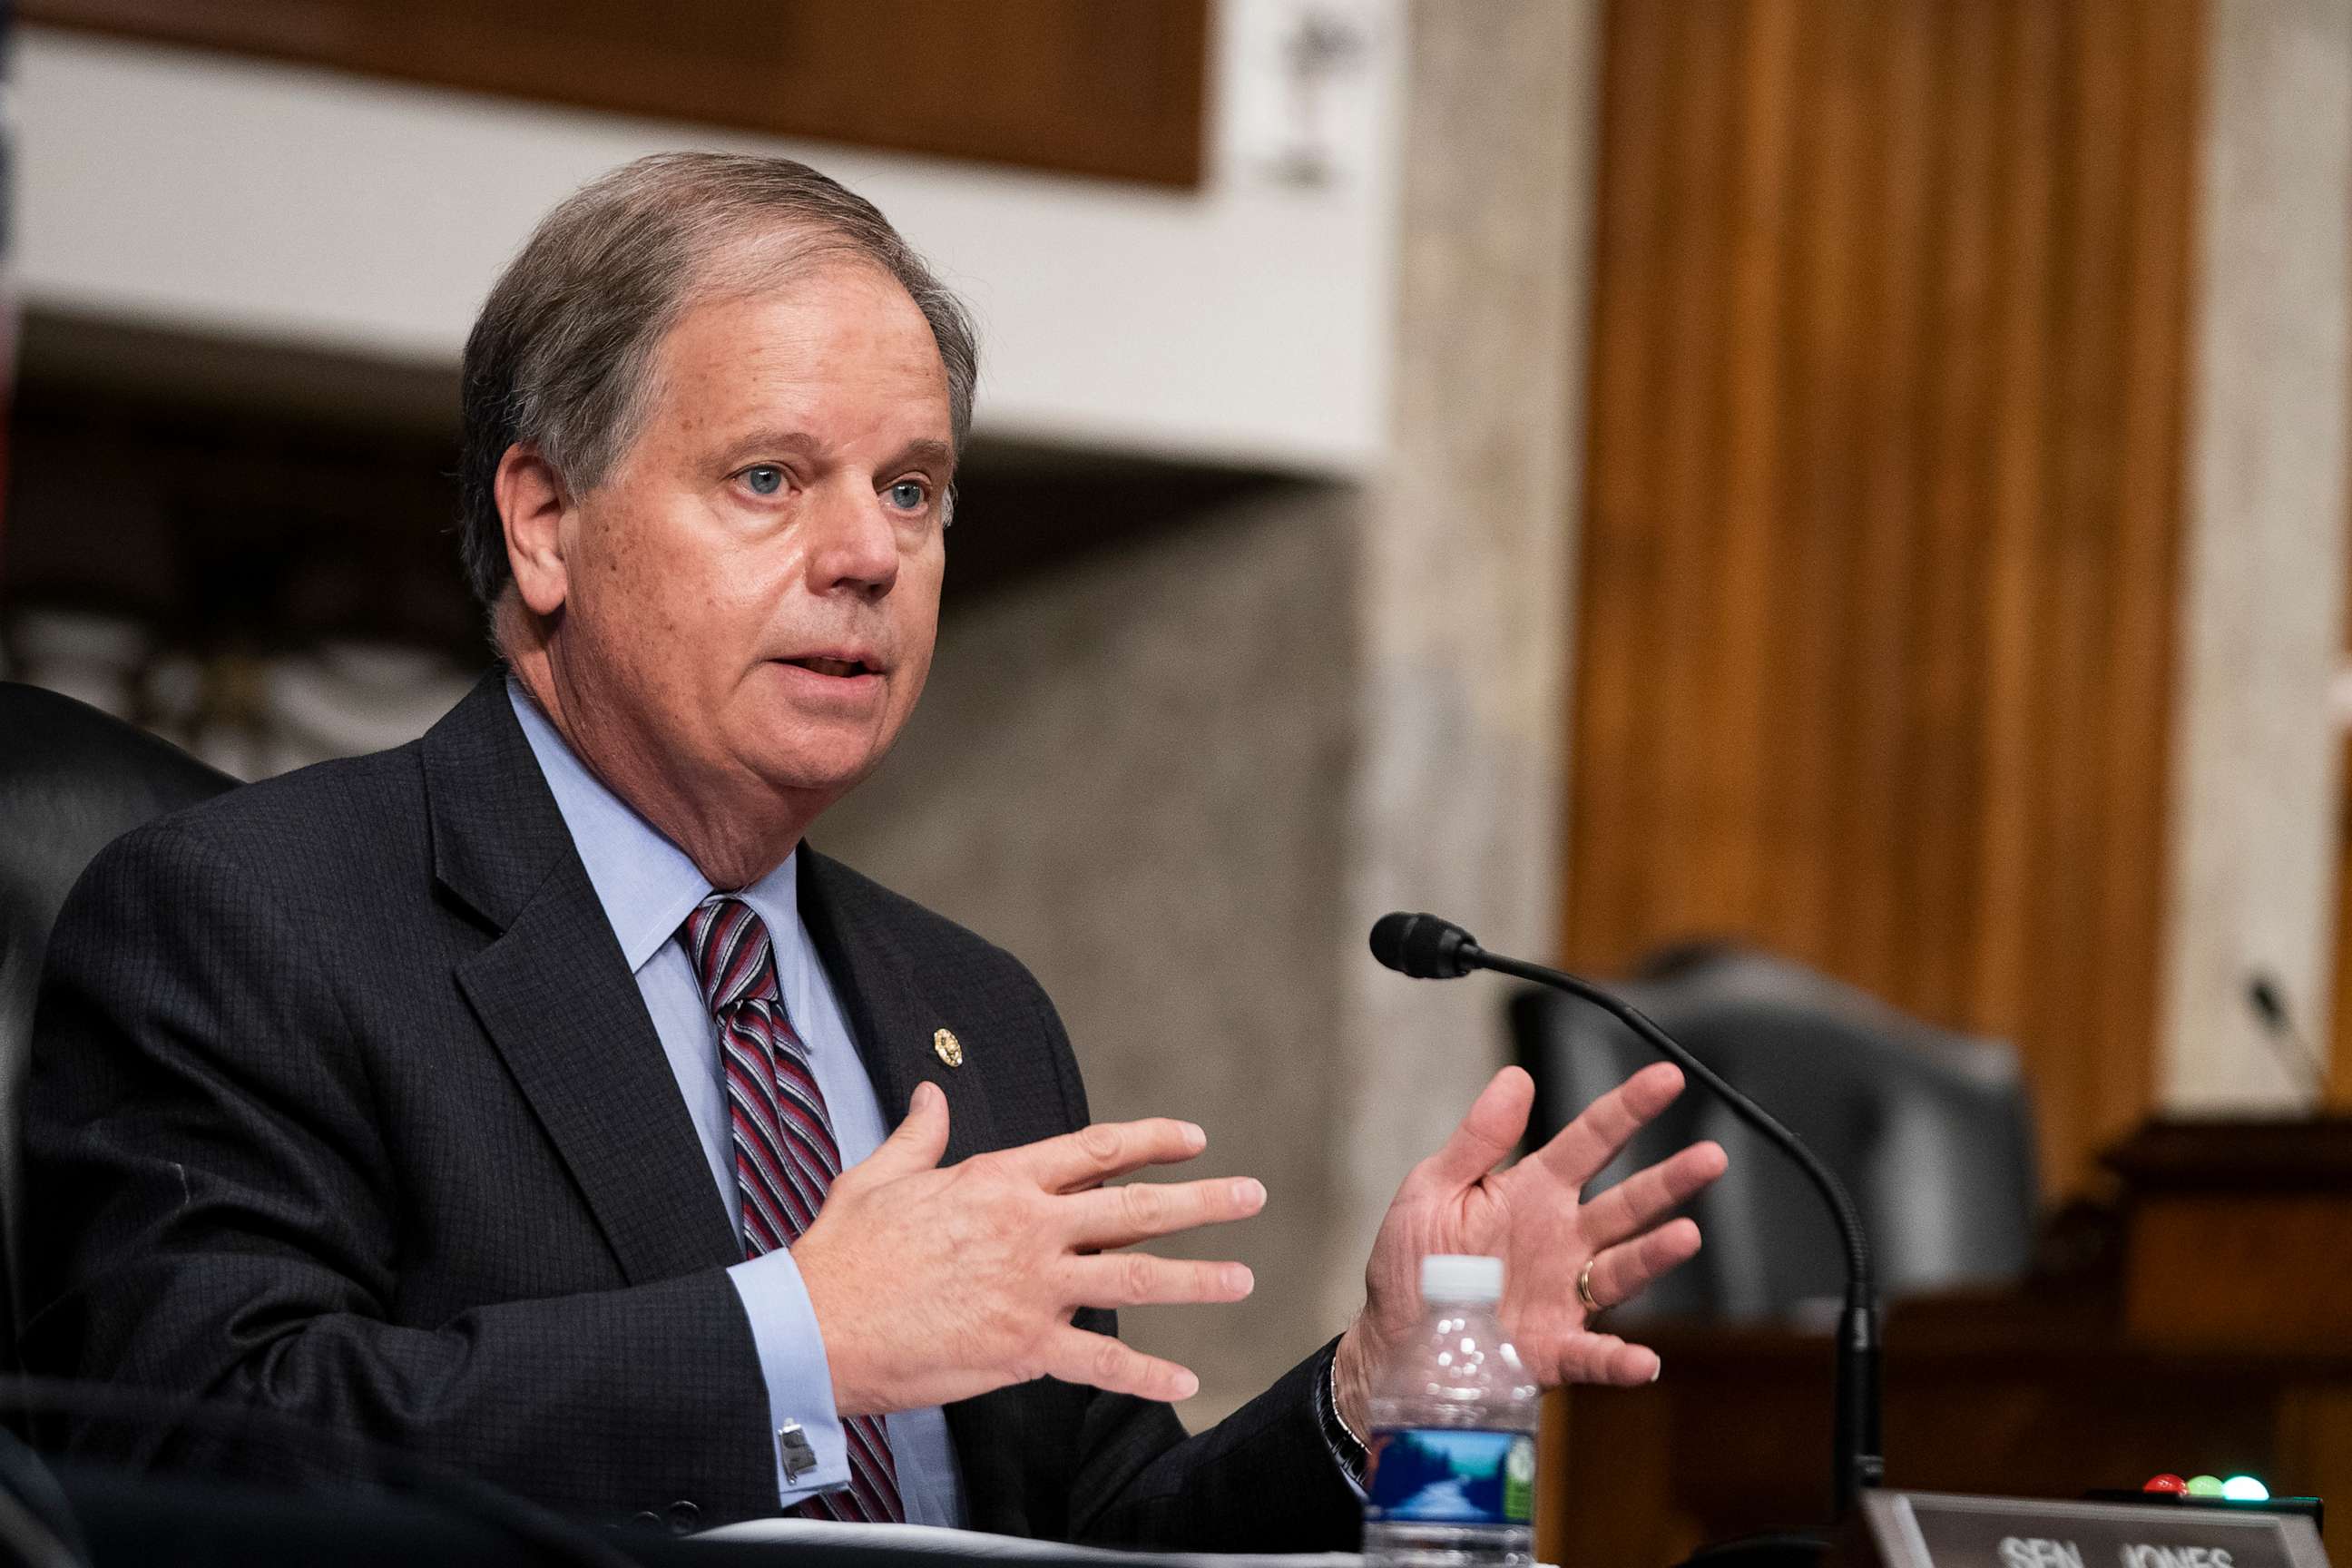 PHOTO: In this Sept. 23, 2020, file photo, Sen. Doug Jones asks a question at a hearing of the Senate Health, Education, Labor and Pensions Committee, in Washington, DC.